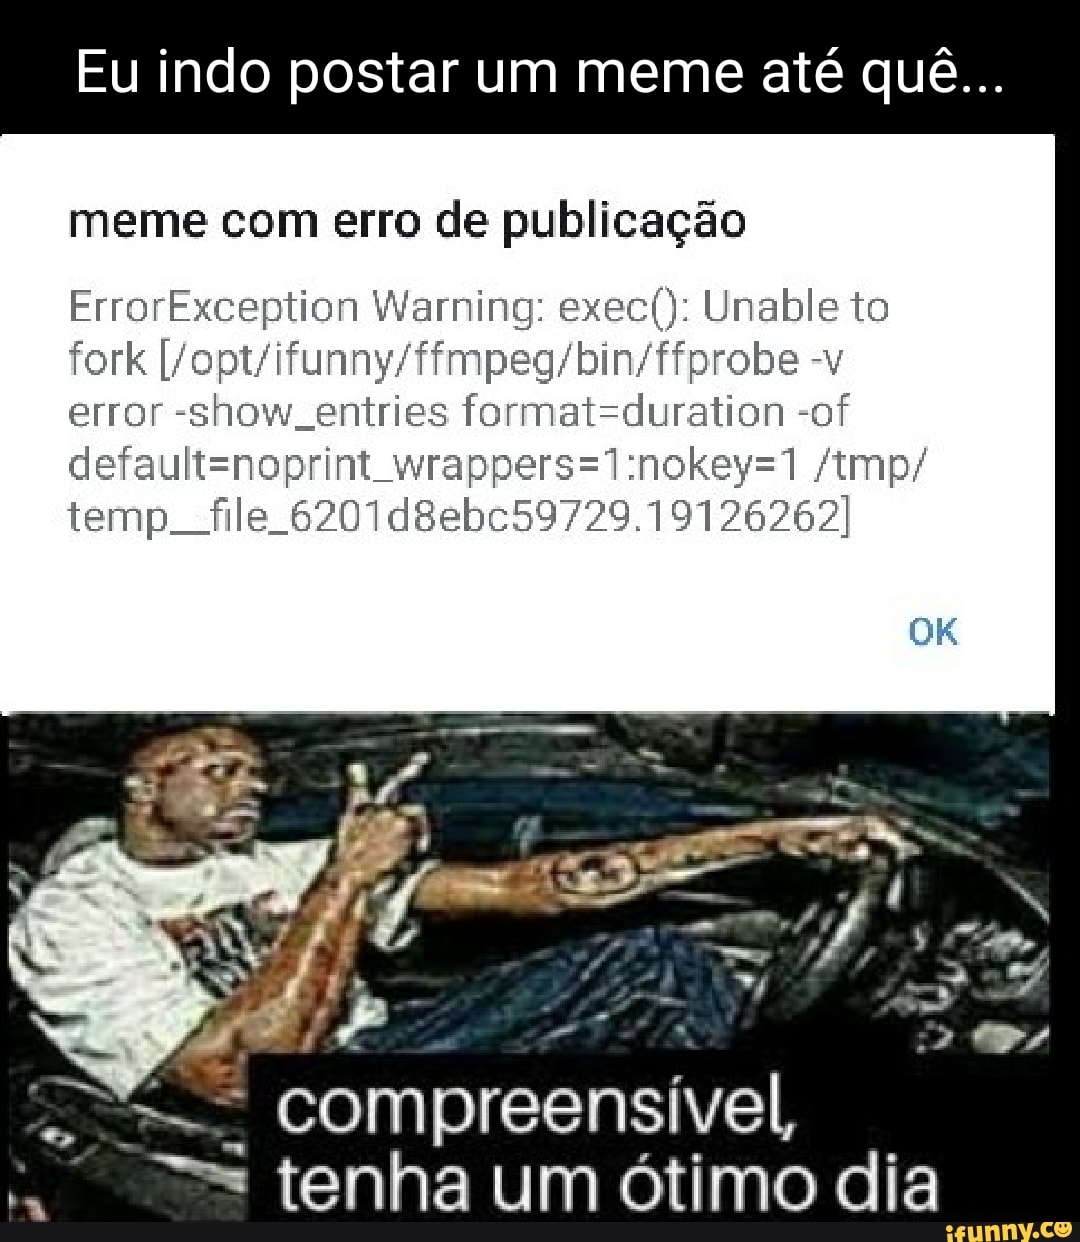 Obanaiiguro memes. Best Collection of funny Obanaiiguro pictures on iFunny  Brazil